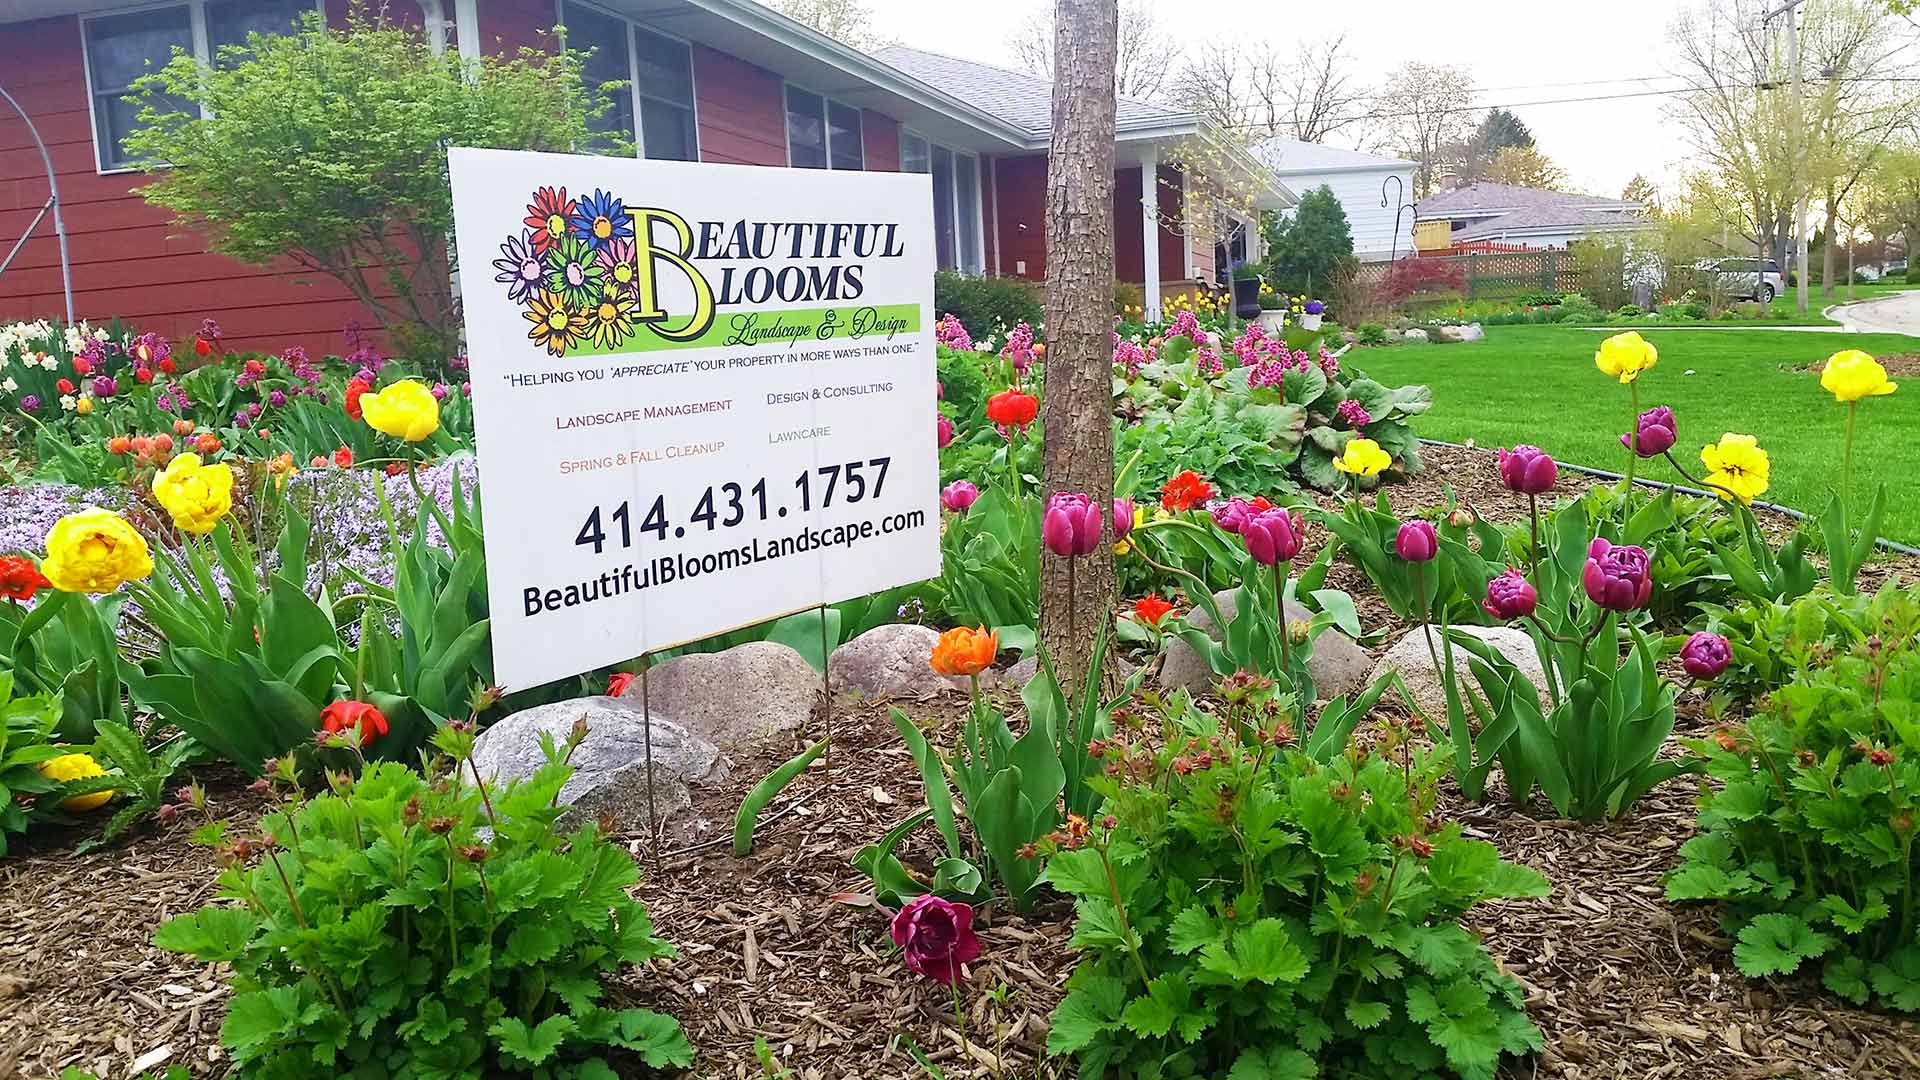 Homeowner, who is proudly displaying that he receives services from Beautiful Blooms, LLC.